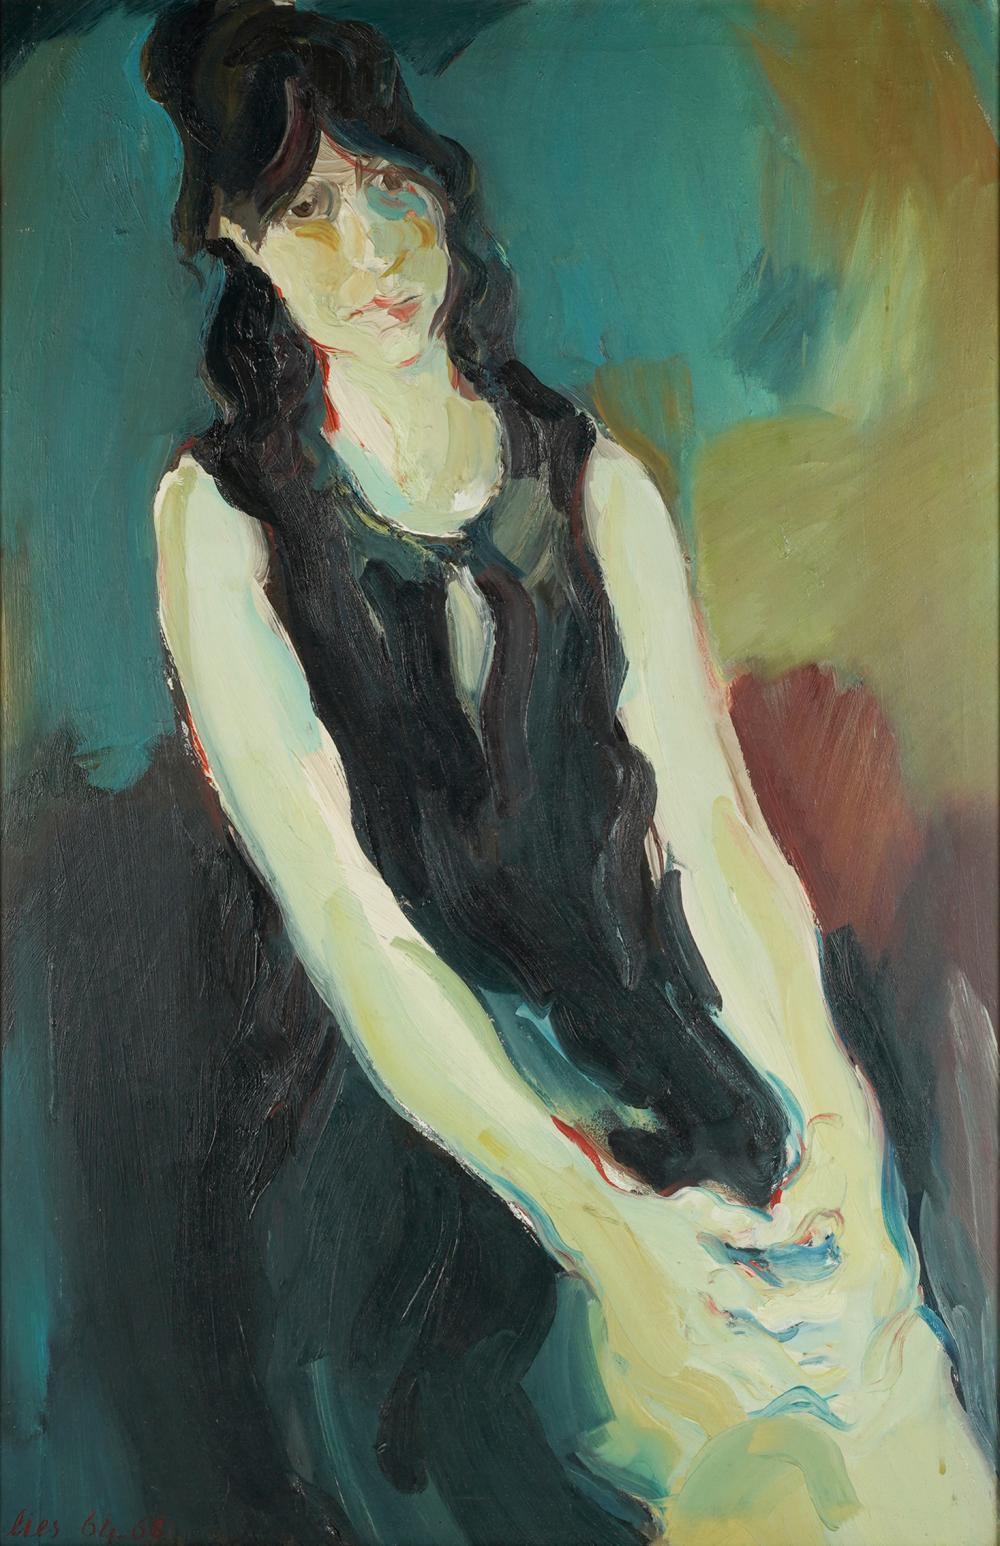 20TH CENTURY: PORTRAIT OF A SEATED WOMAN1966;